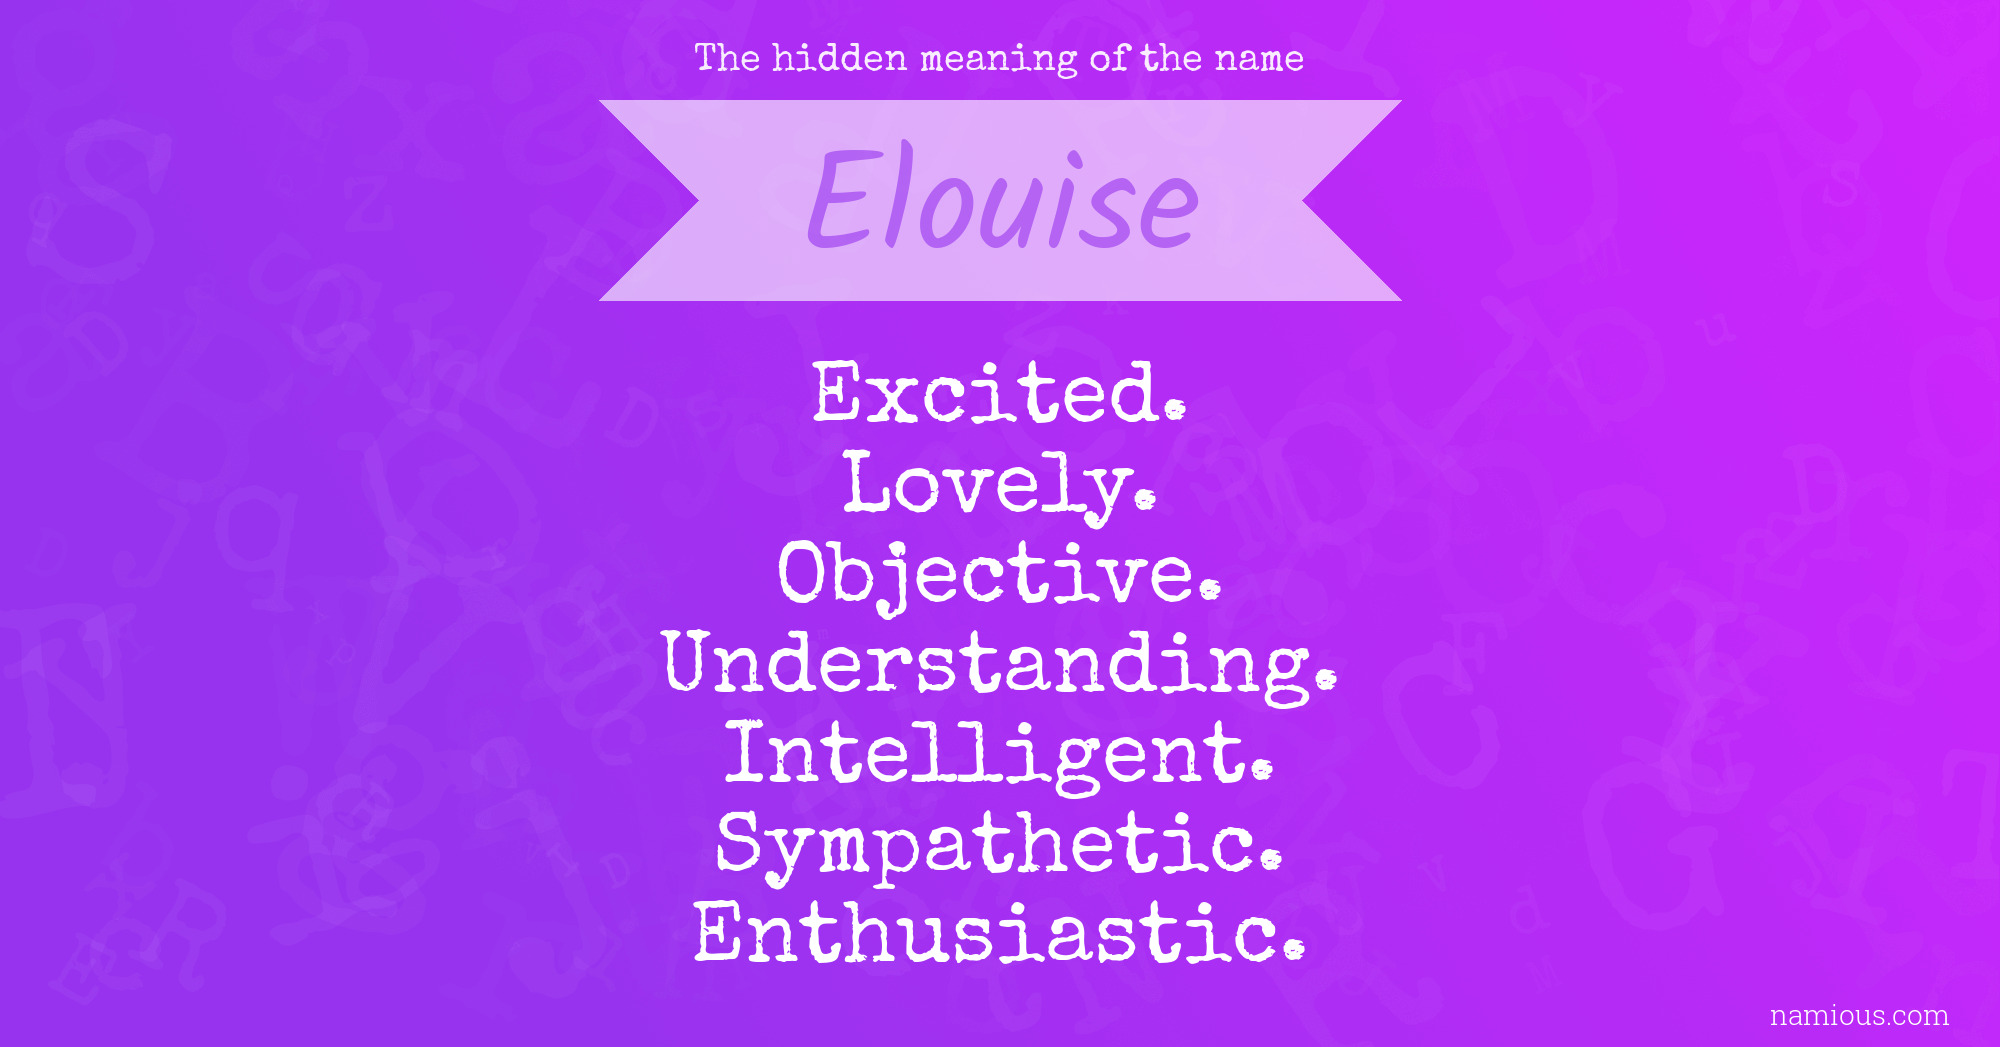 The hidden meaning of the name Elouise